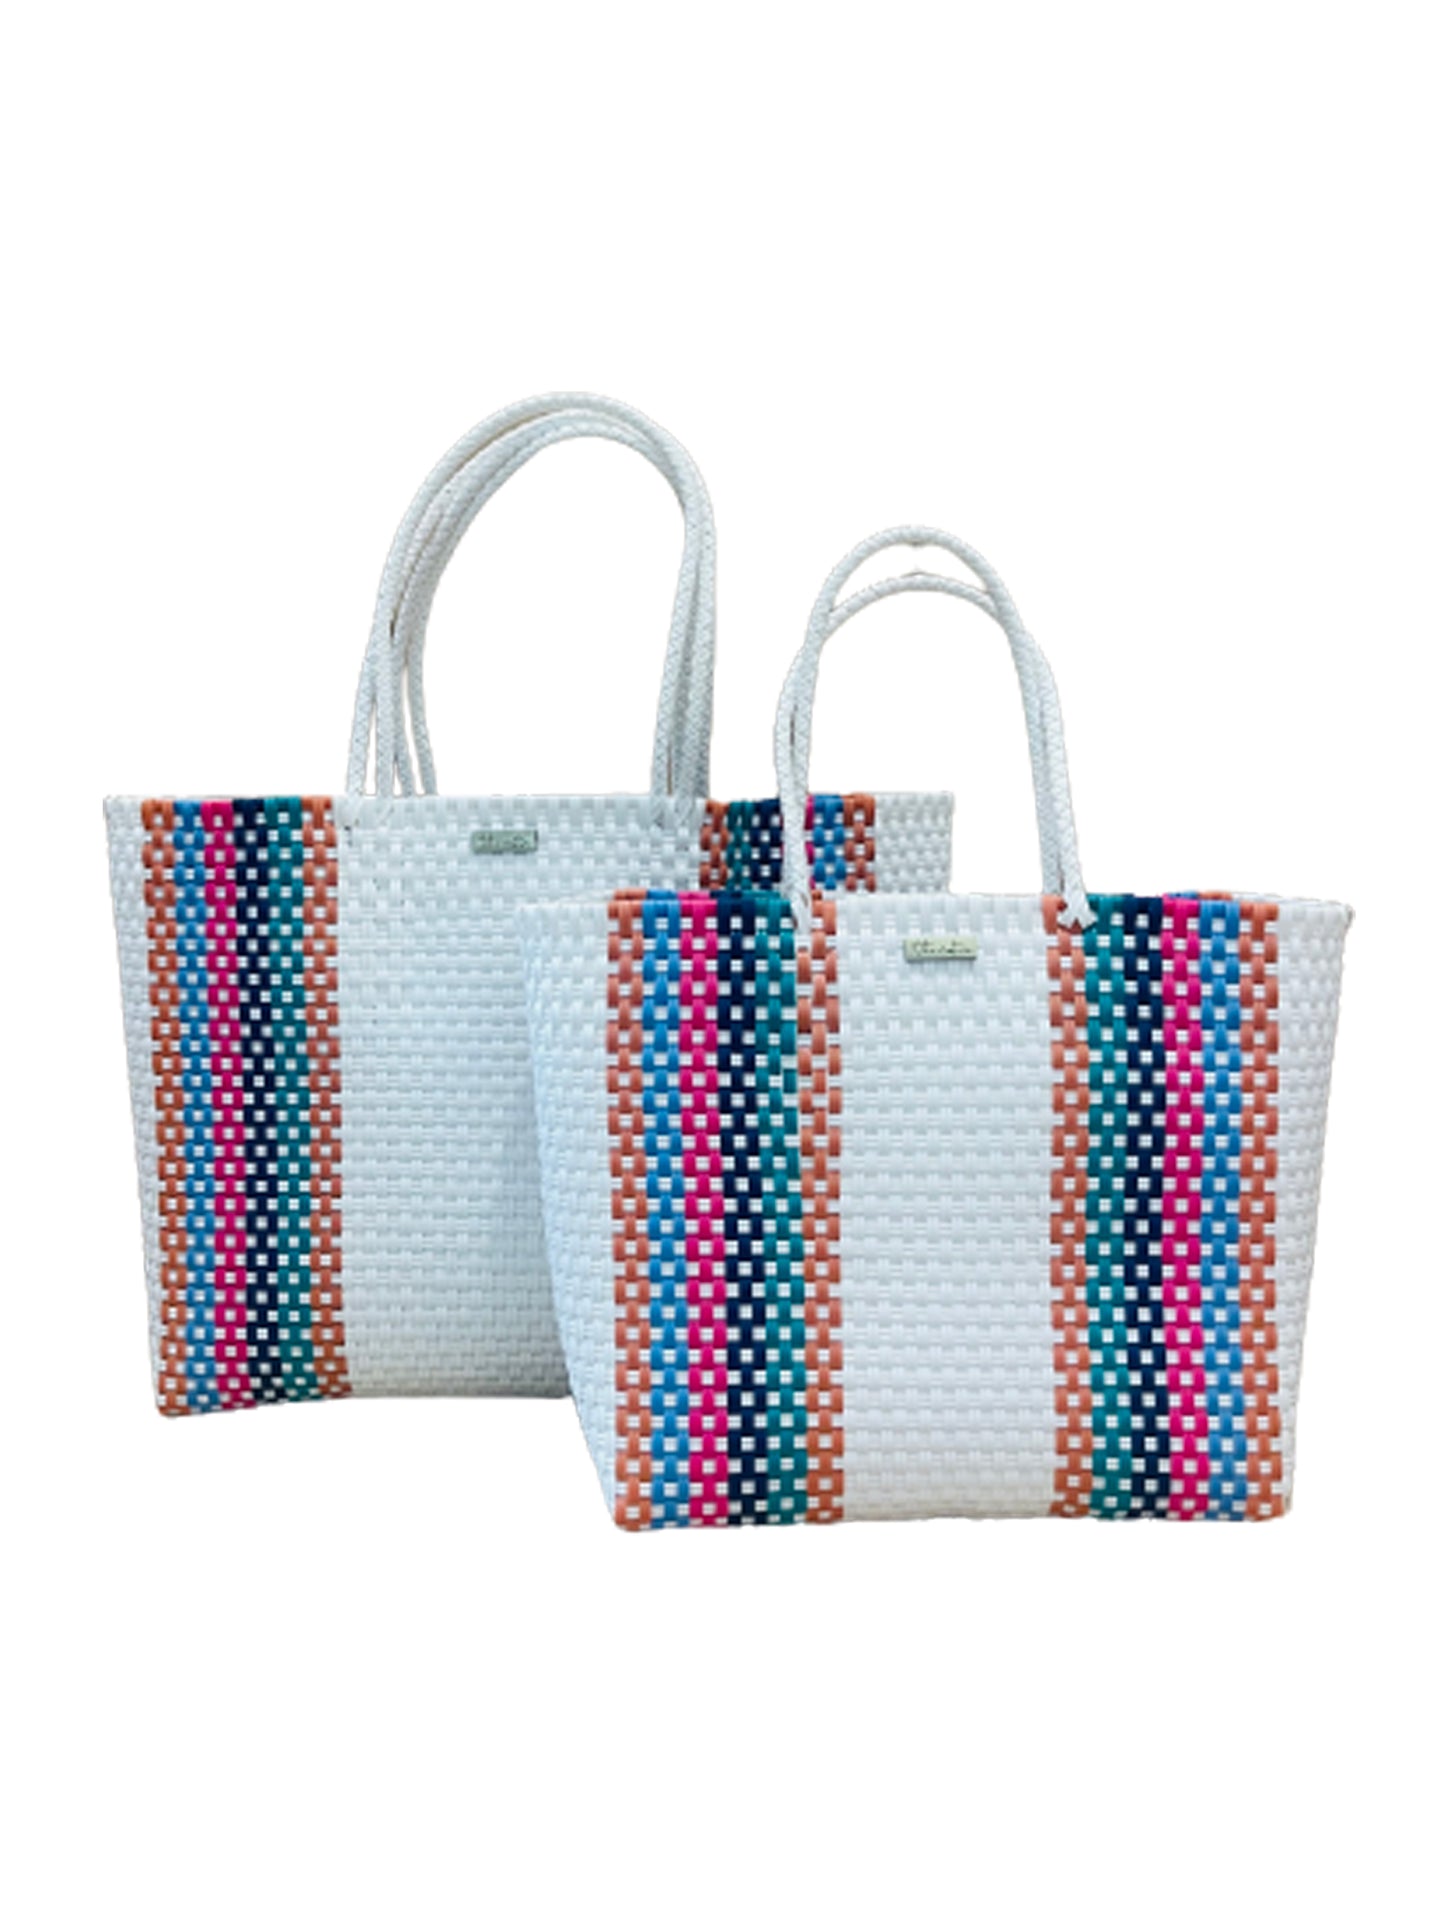 playa tote large and small colorful white